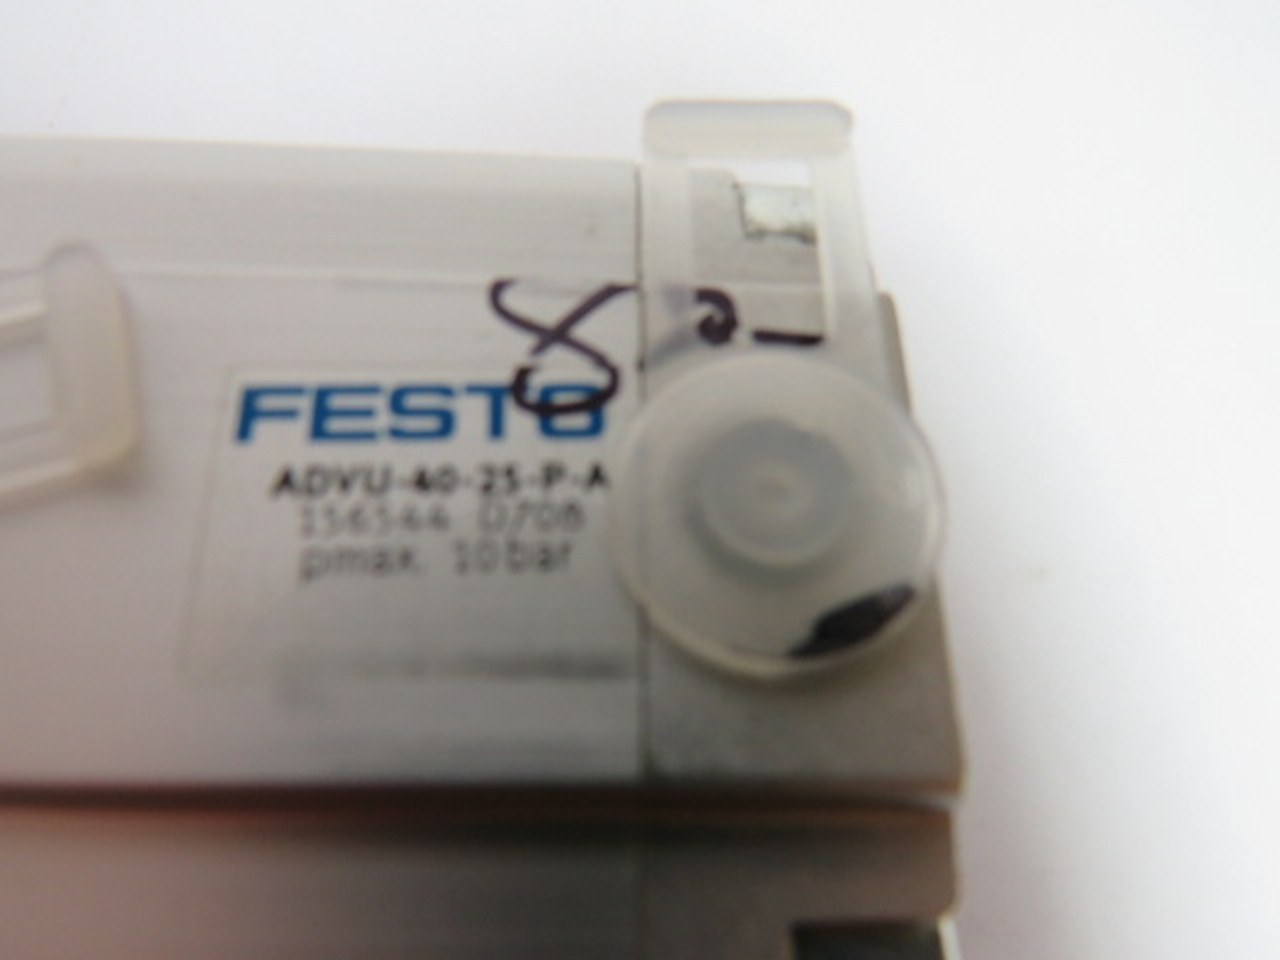 Festo ADVU-40-25-P-A Compact Pneumatic Cylinder 40mm Bore 25mm Stroke USED